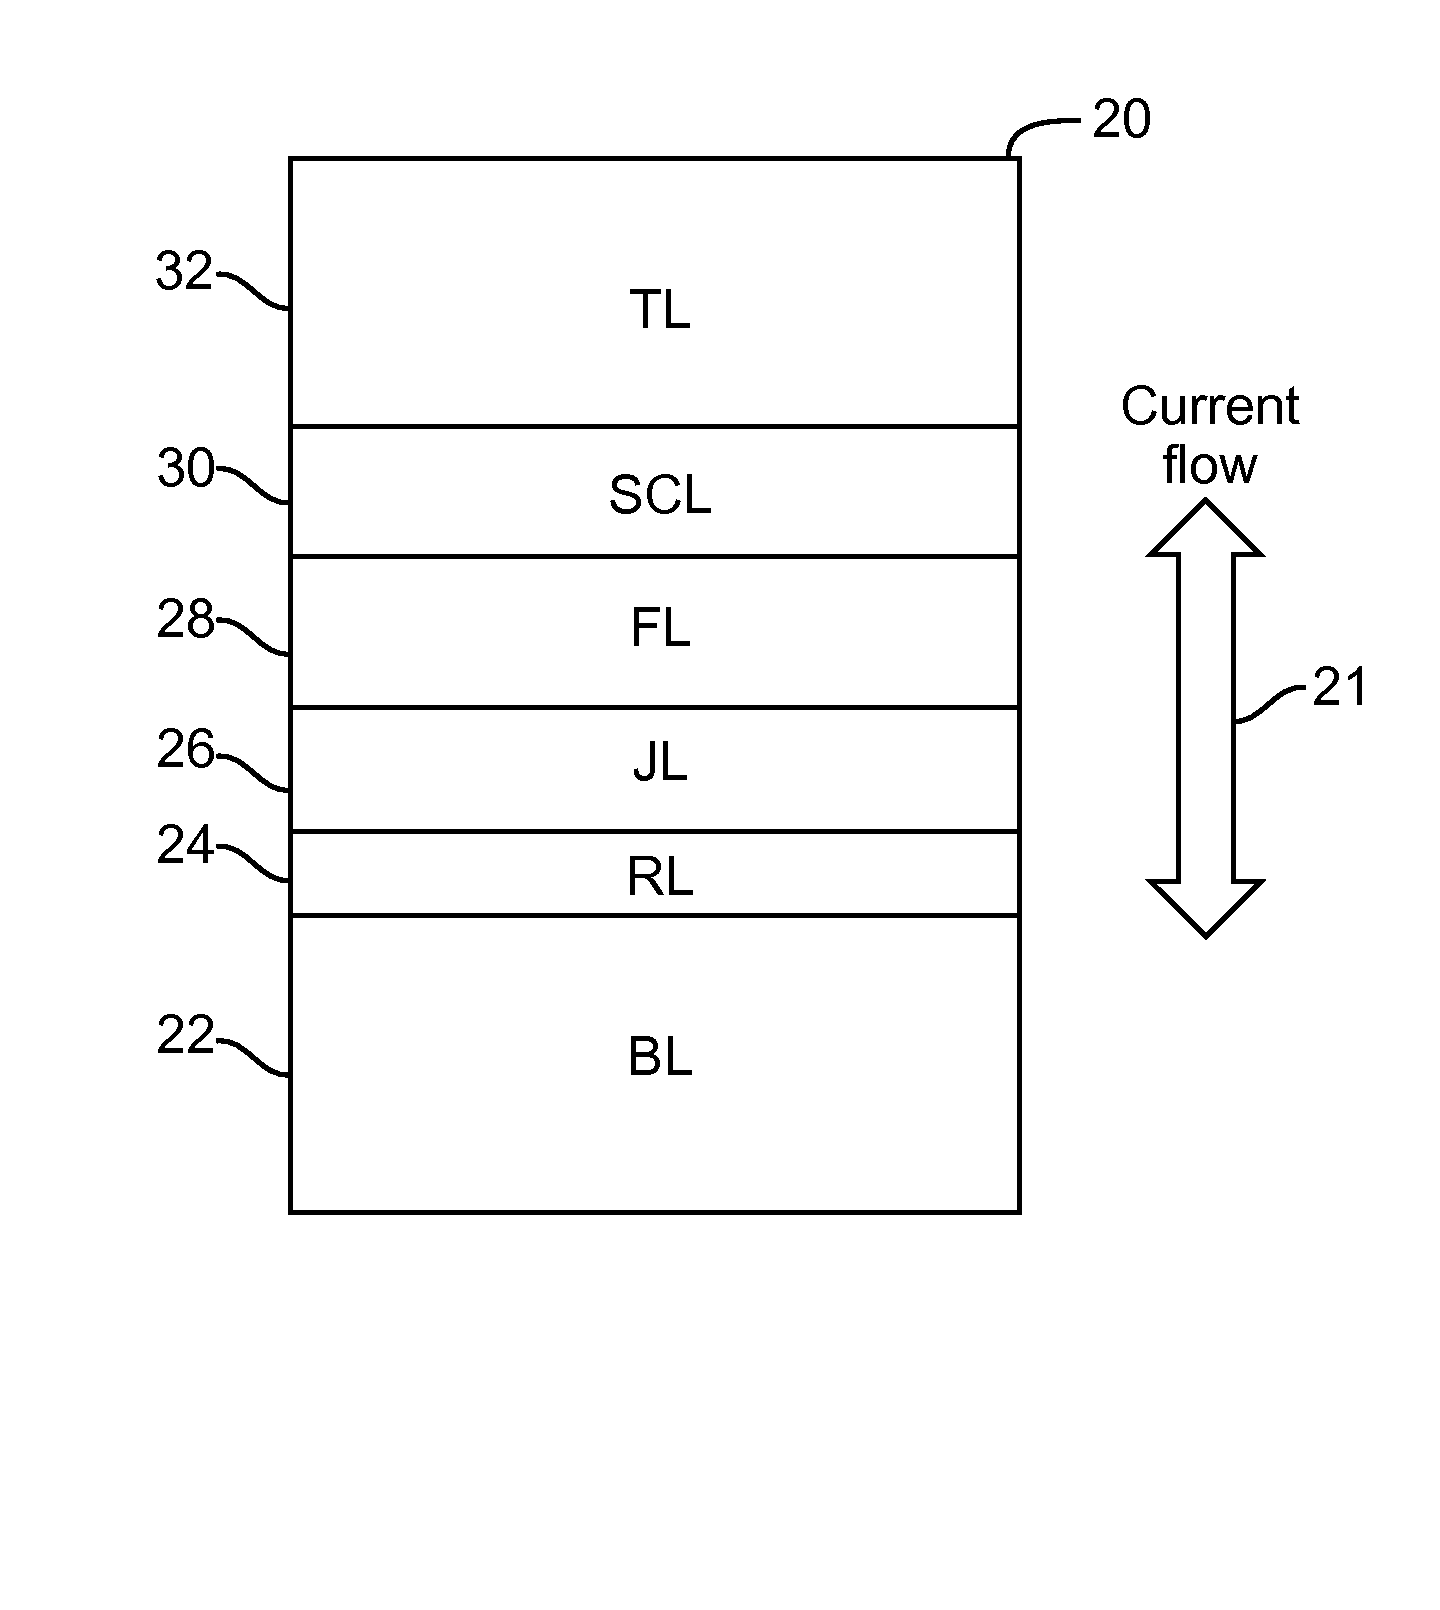 Magnetic Tunnel Junction With Non-Metallic Layer Adjacent to Free Layer